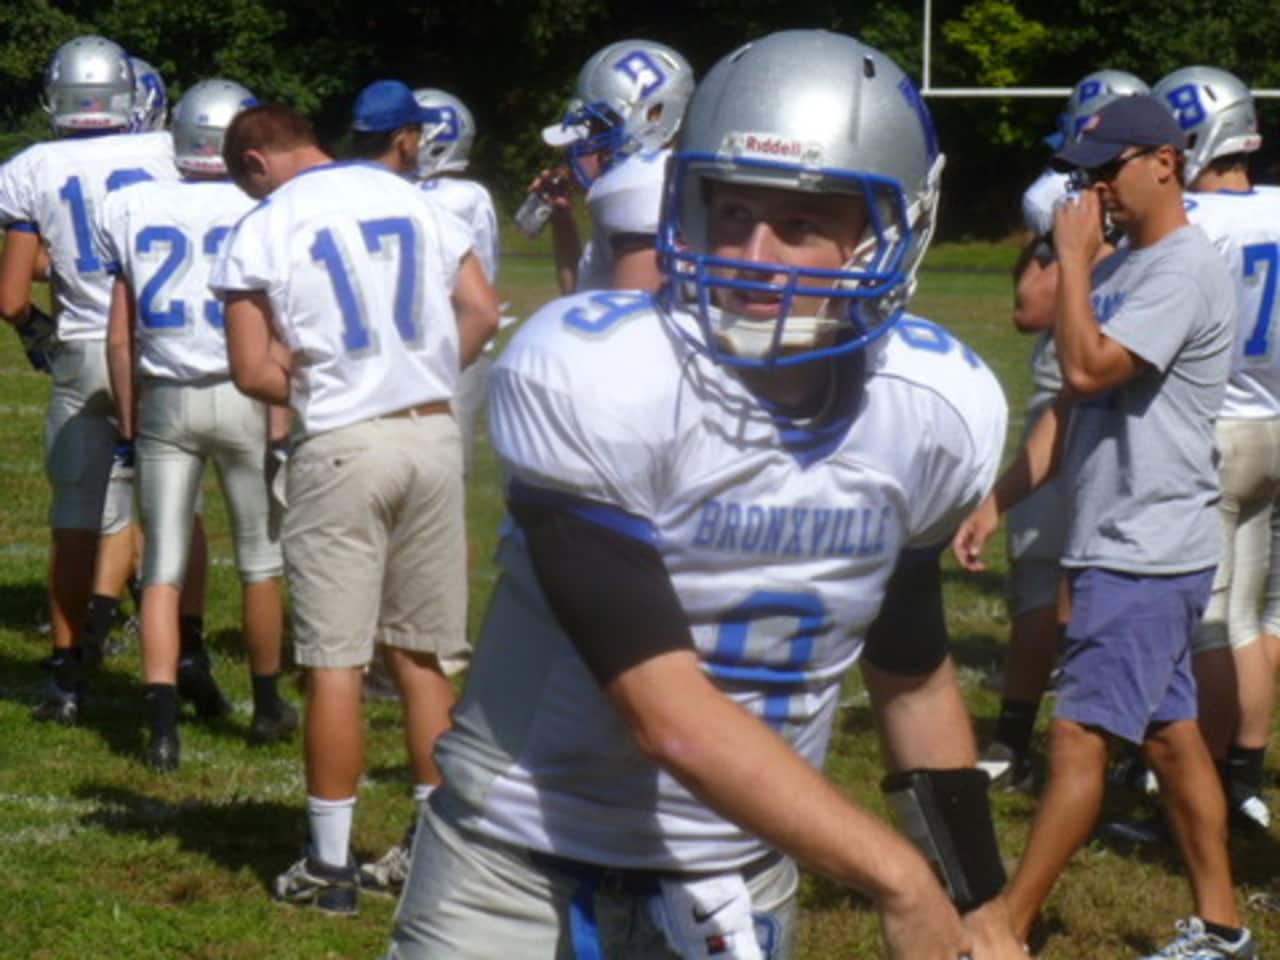 The Bronxville High School football team will travel to Woodlands for a first round playoff game that is a rematch of their week one meeting.